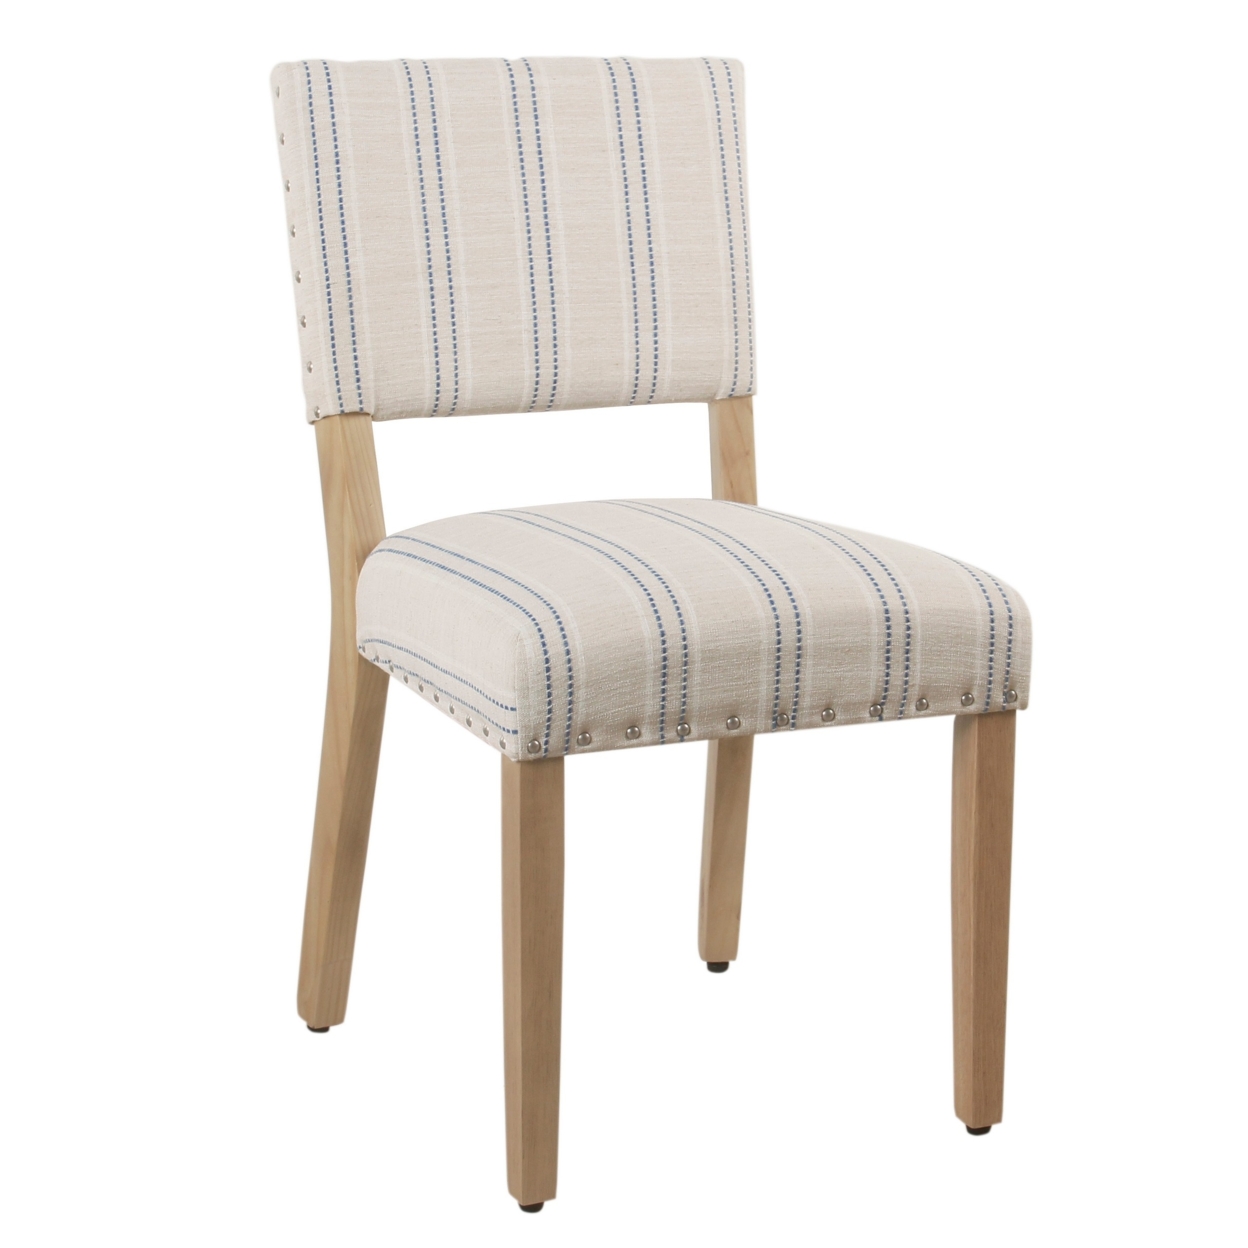 Wooden Dining Chair With Striped Pattern Fabric Cushioned Seat, Blue And White, Set Of Two-Saltoro Sherpi